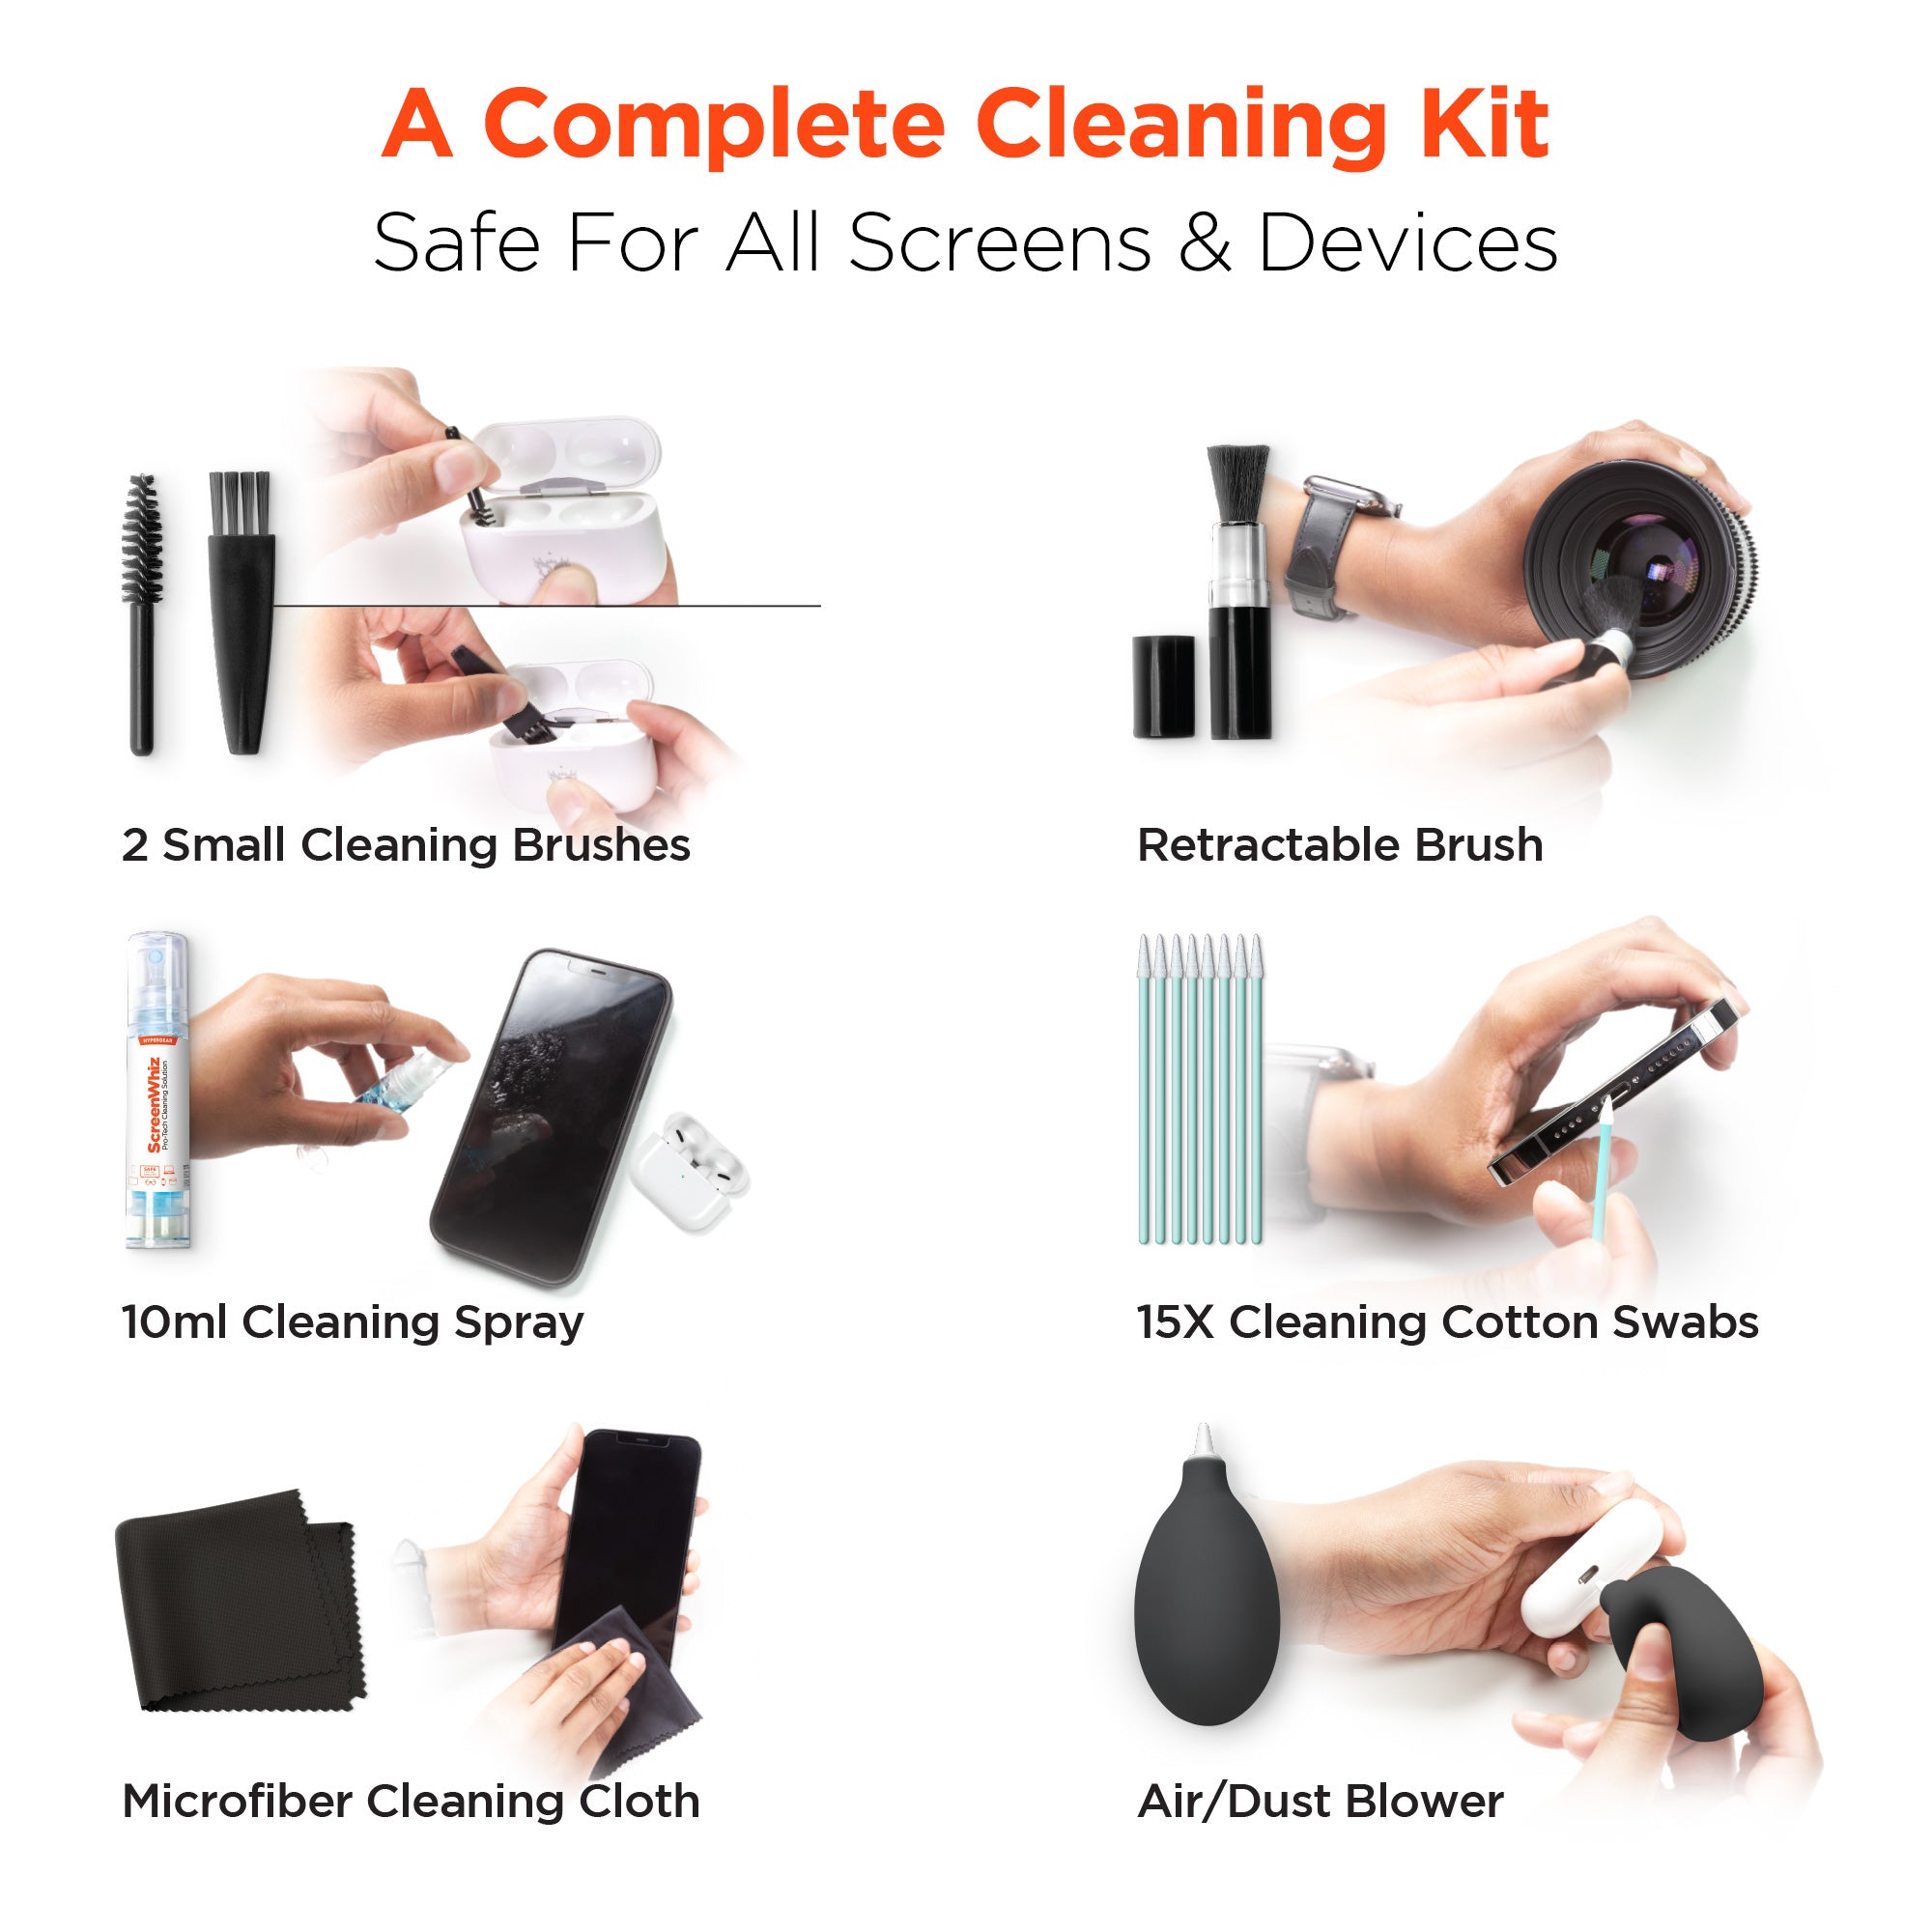 Complete cleaning kit